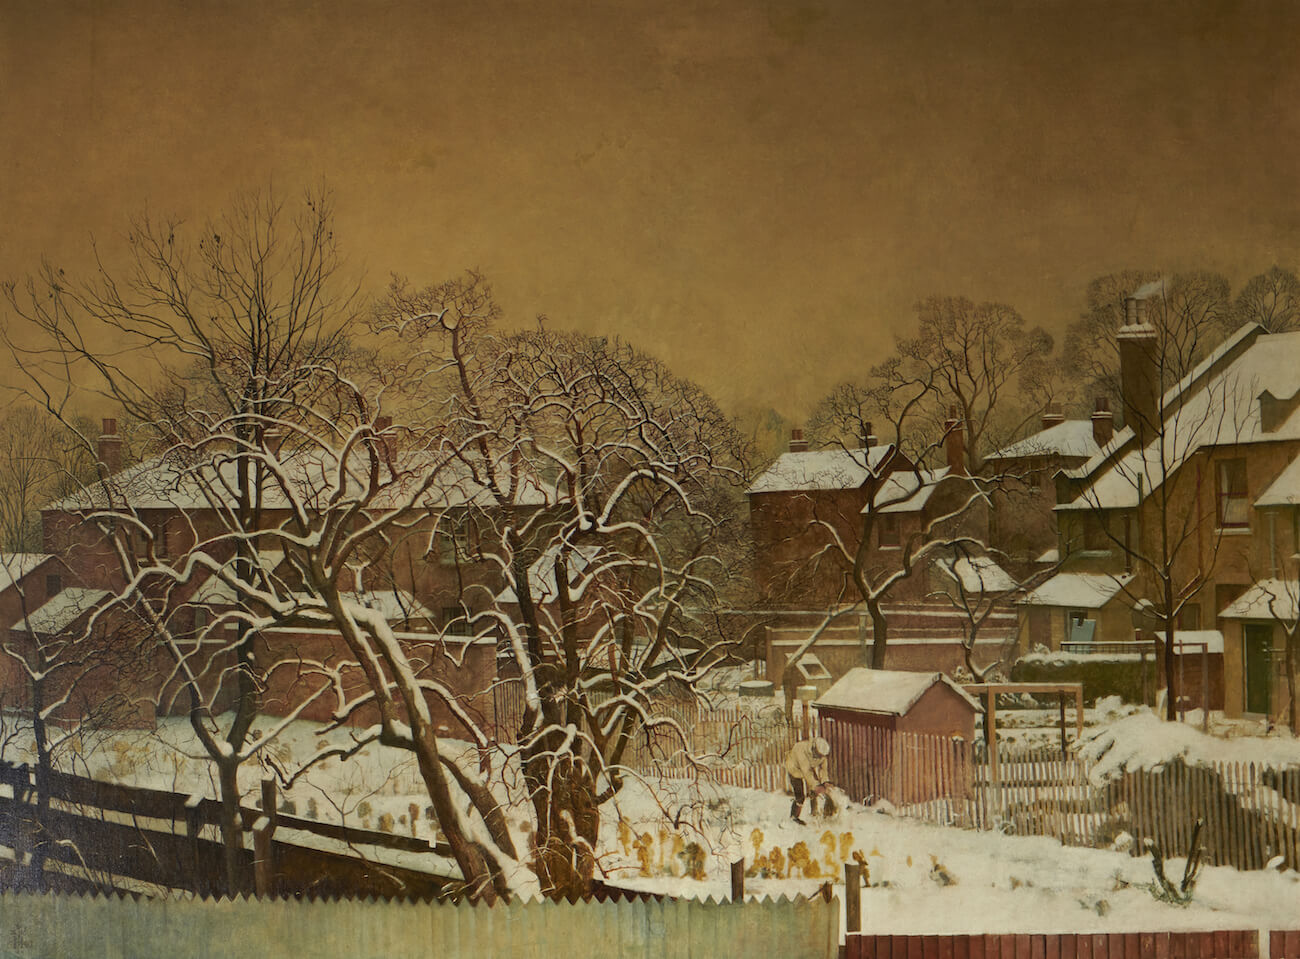 Harry Bush - Snowfall in the Suburbs - A View from the Artist's House